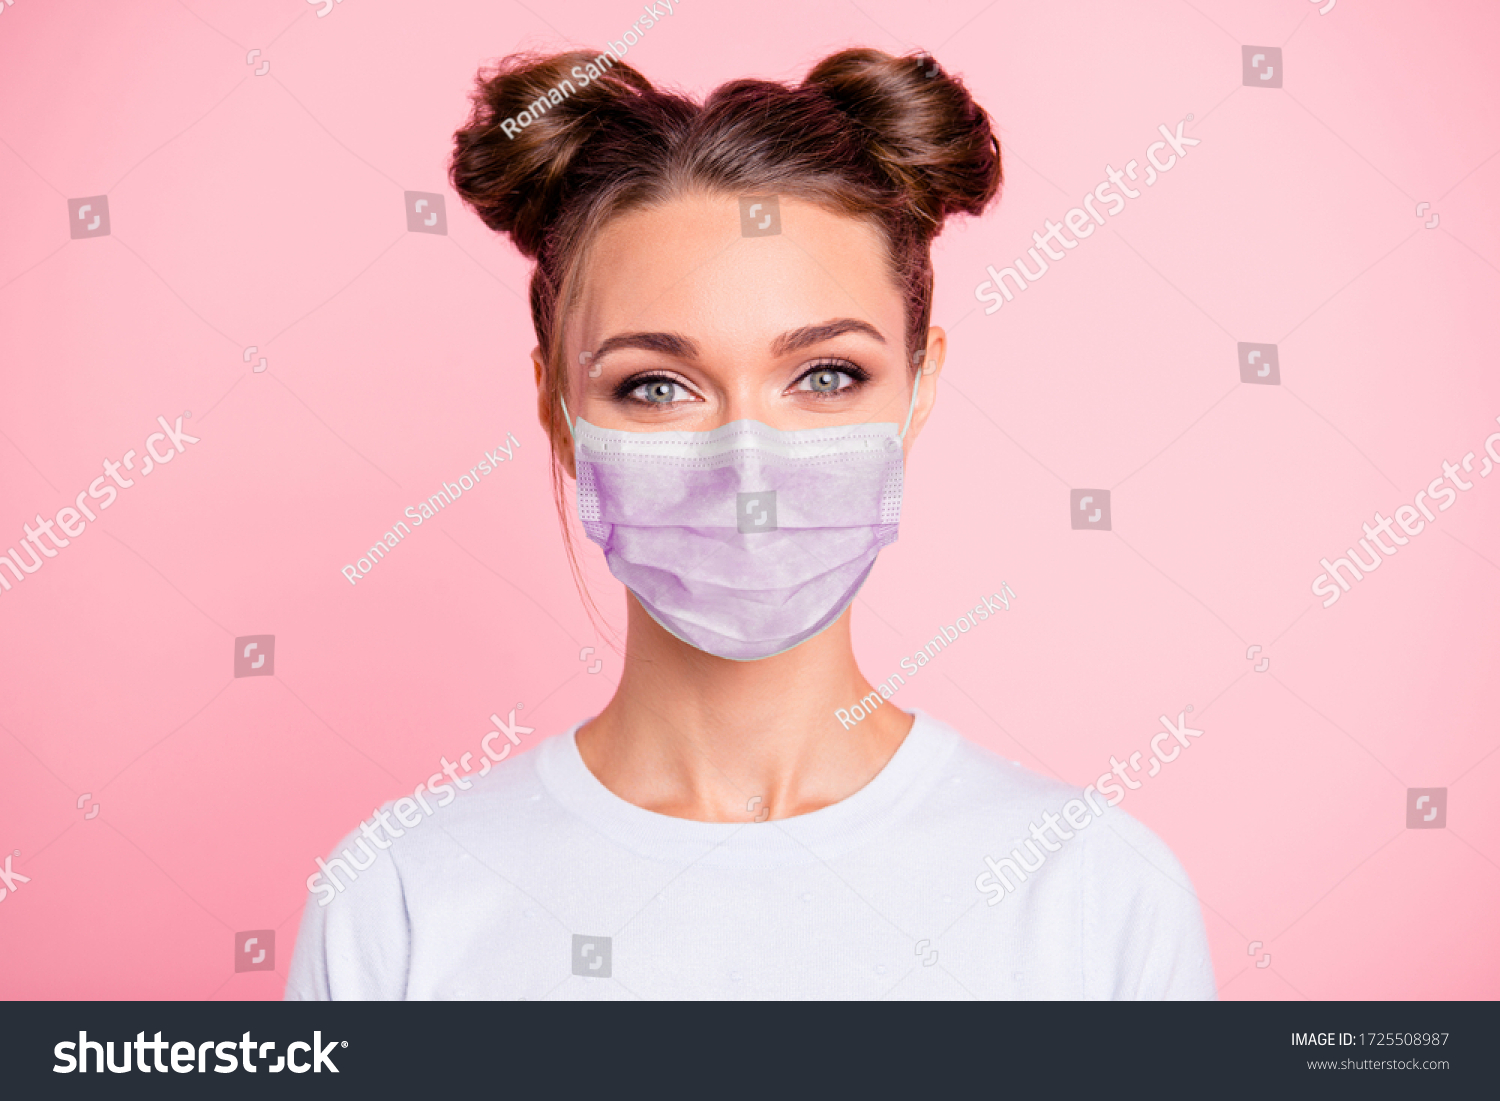 Close-up portrait of her she nice attractive lovable cute adorable winsome girl with two buns wear white shirt protection flu cold facial mask isolated over pink pastel background #1725508987